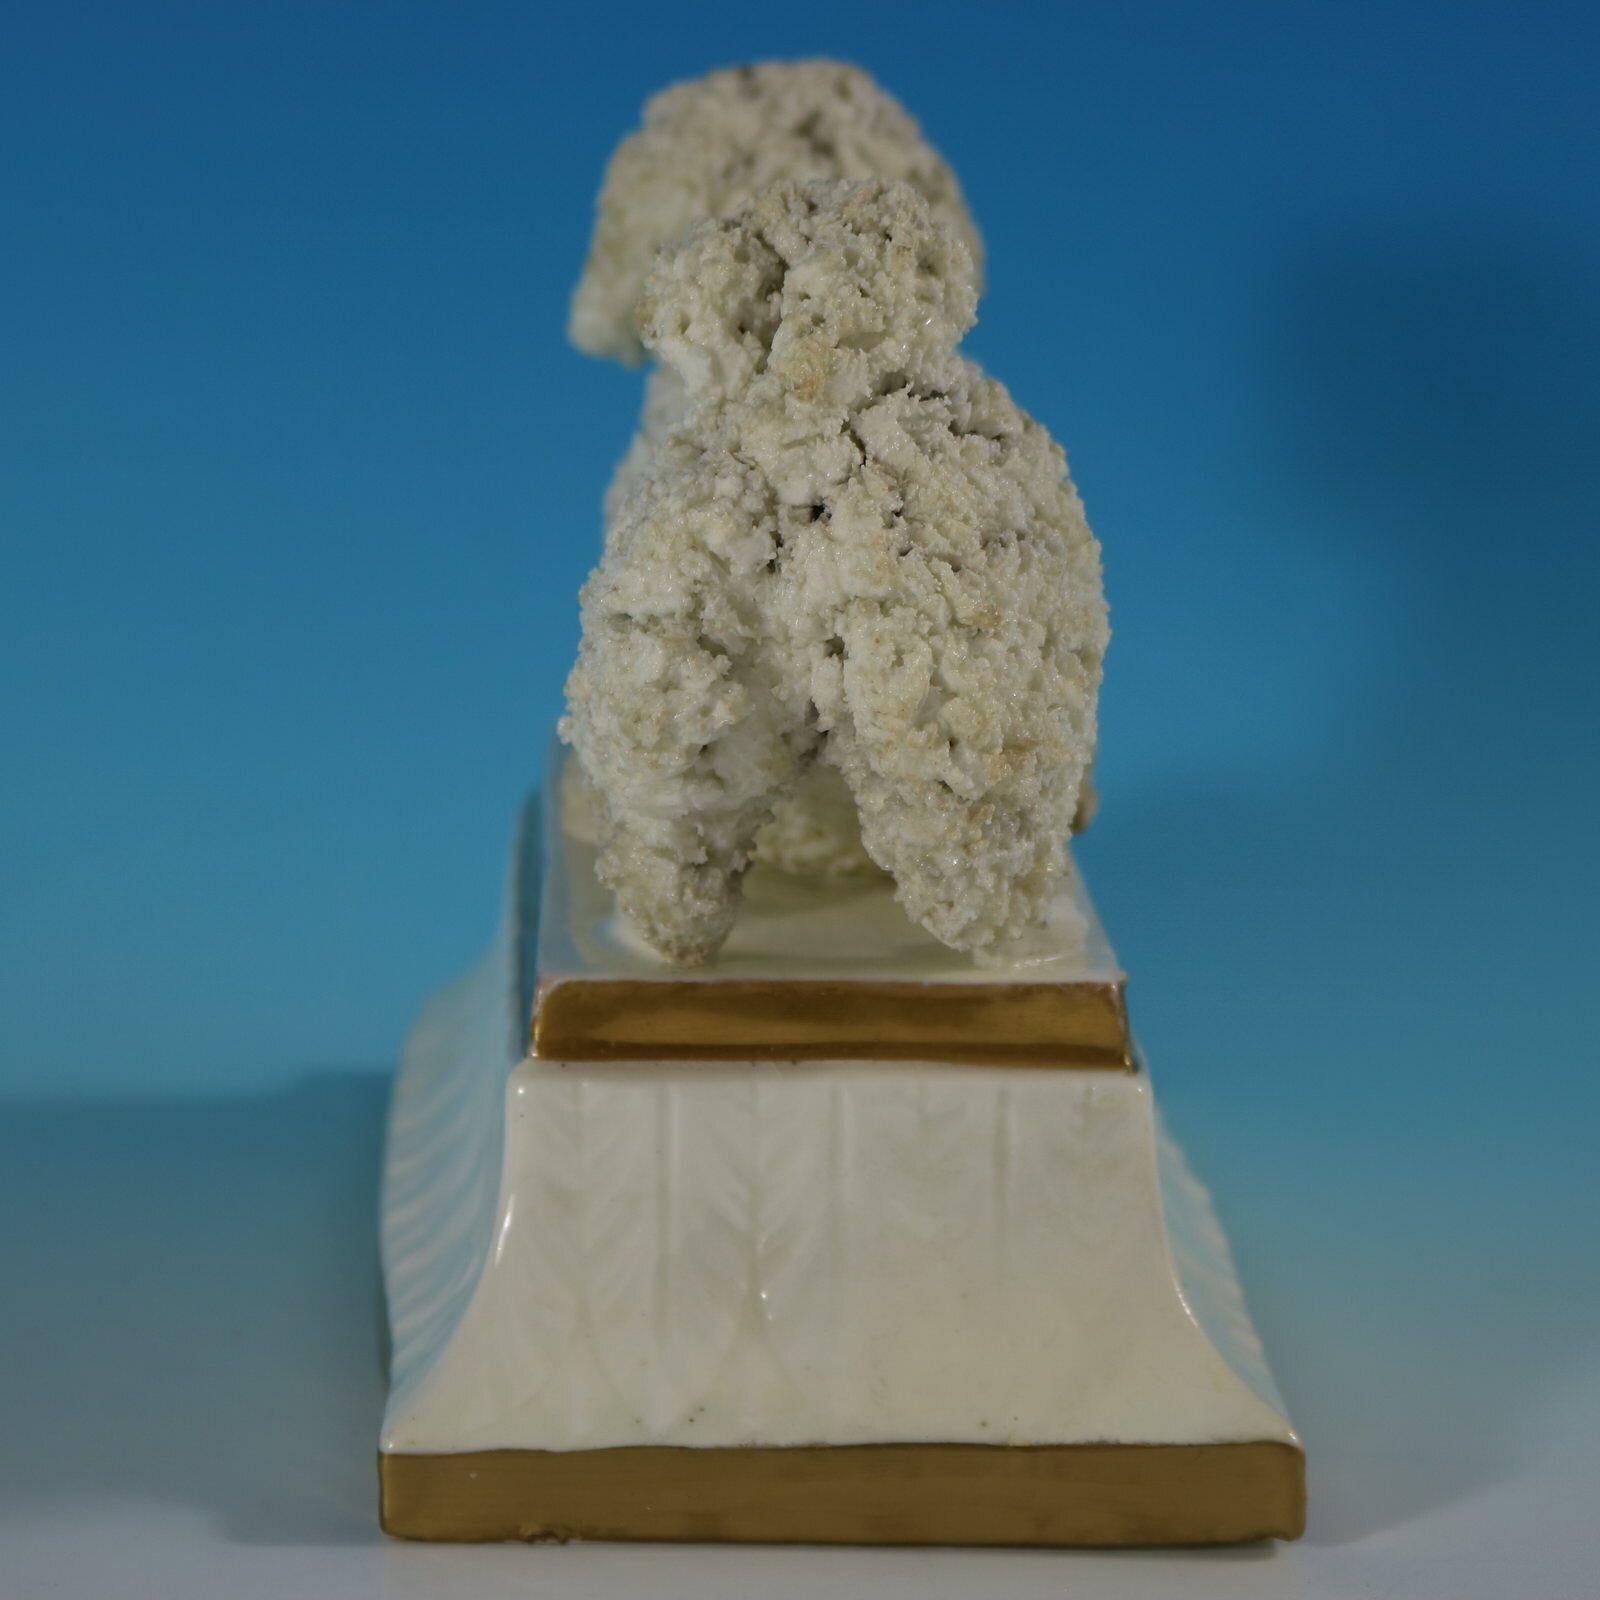 Staffordshire Pottery porcellaneous figure which features a poodle in a playful pose, crouched on a rectangular base. The base has leaf molding around the sides and has two dull gilt base lines.